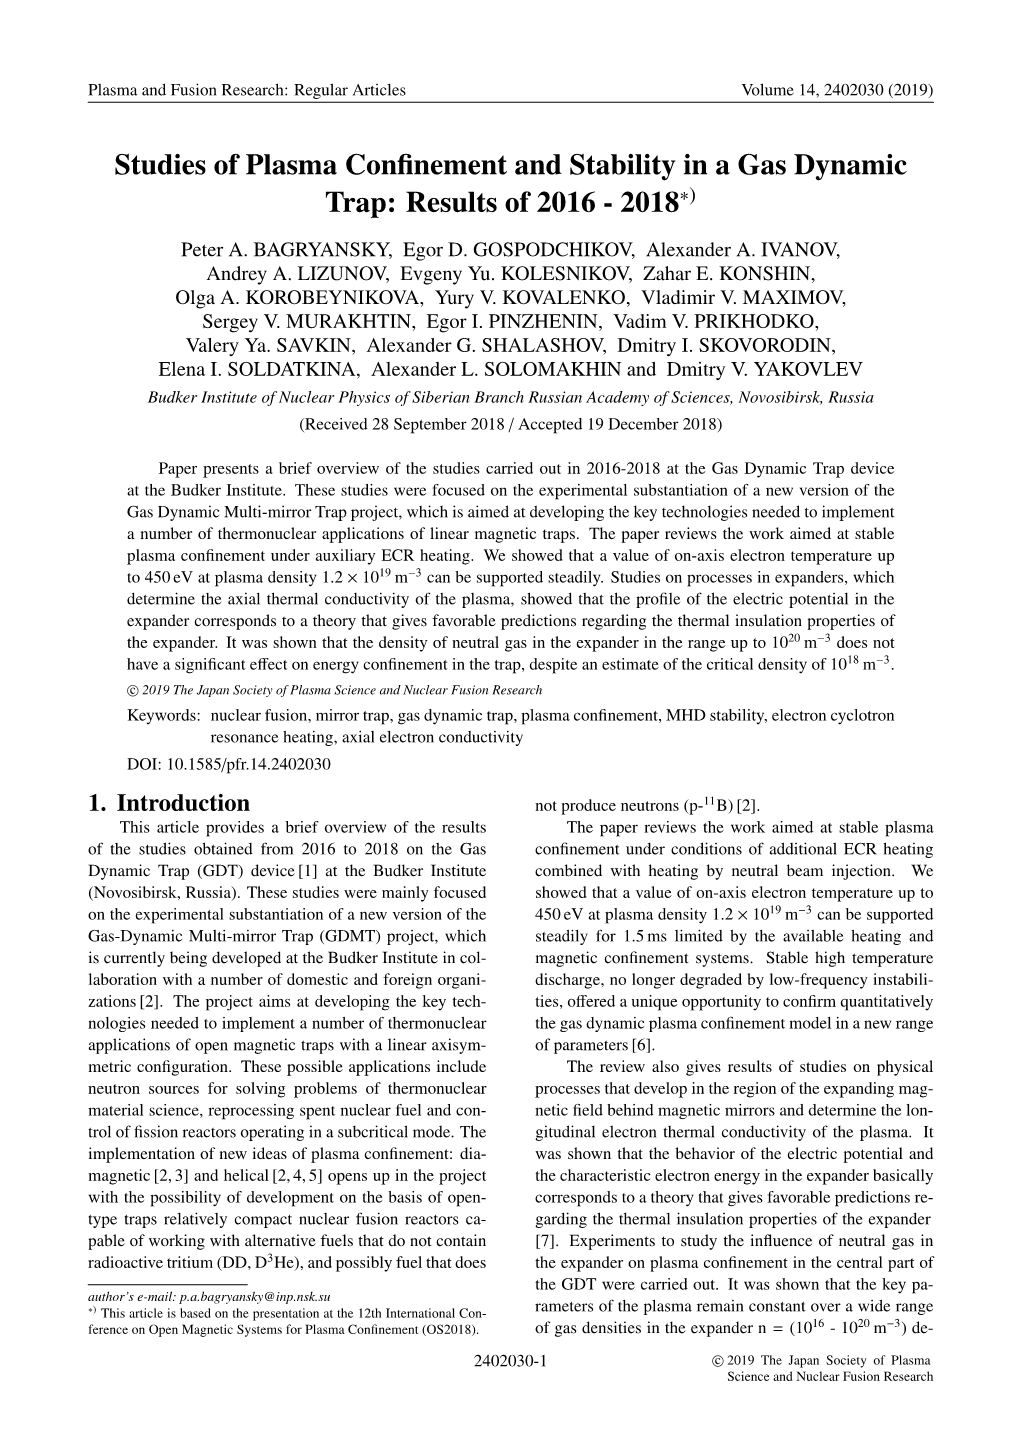 Studies of Plasma Confinement and Stability in a Gas Dynamic Trap